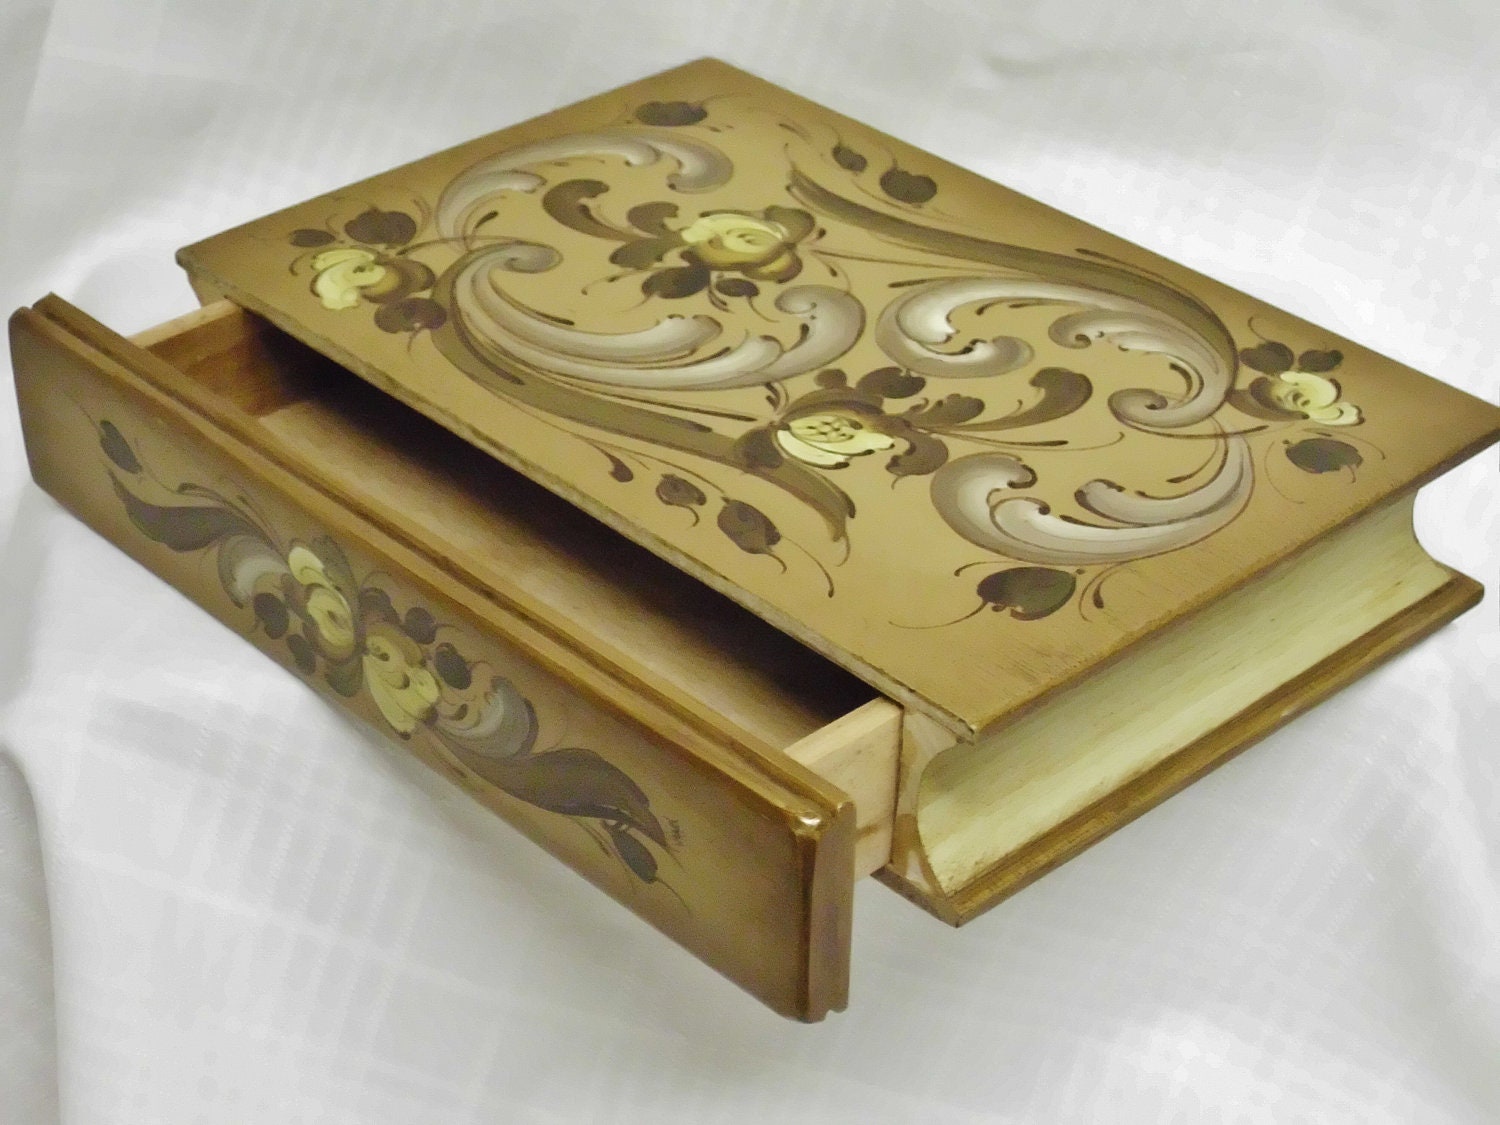 Rosemaled Wooden Book Box with Secret Drawer